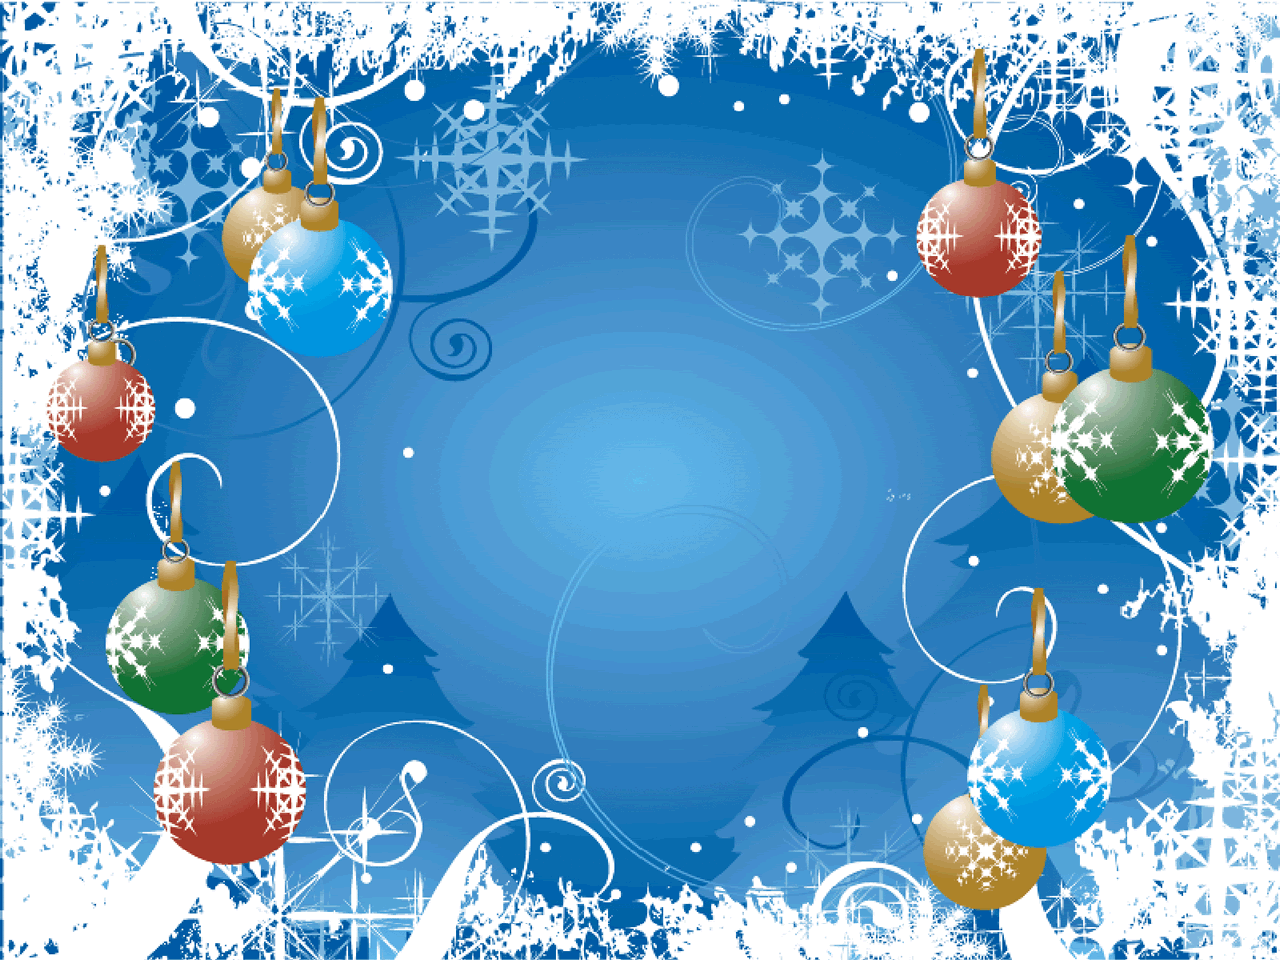 30 Free Christmas Wallpapers for Android